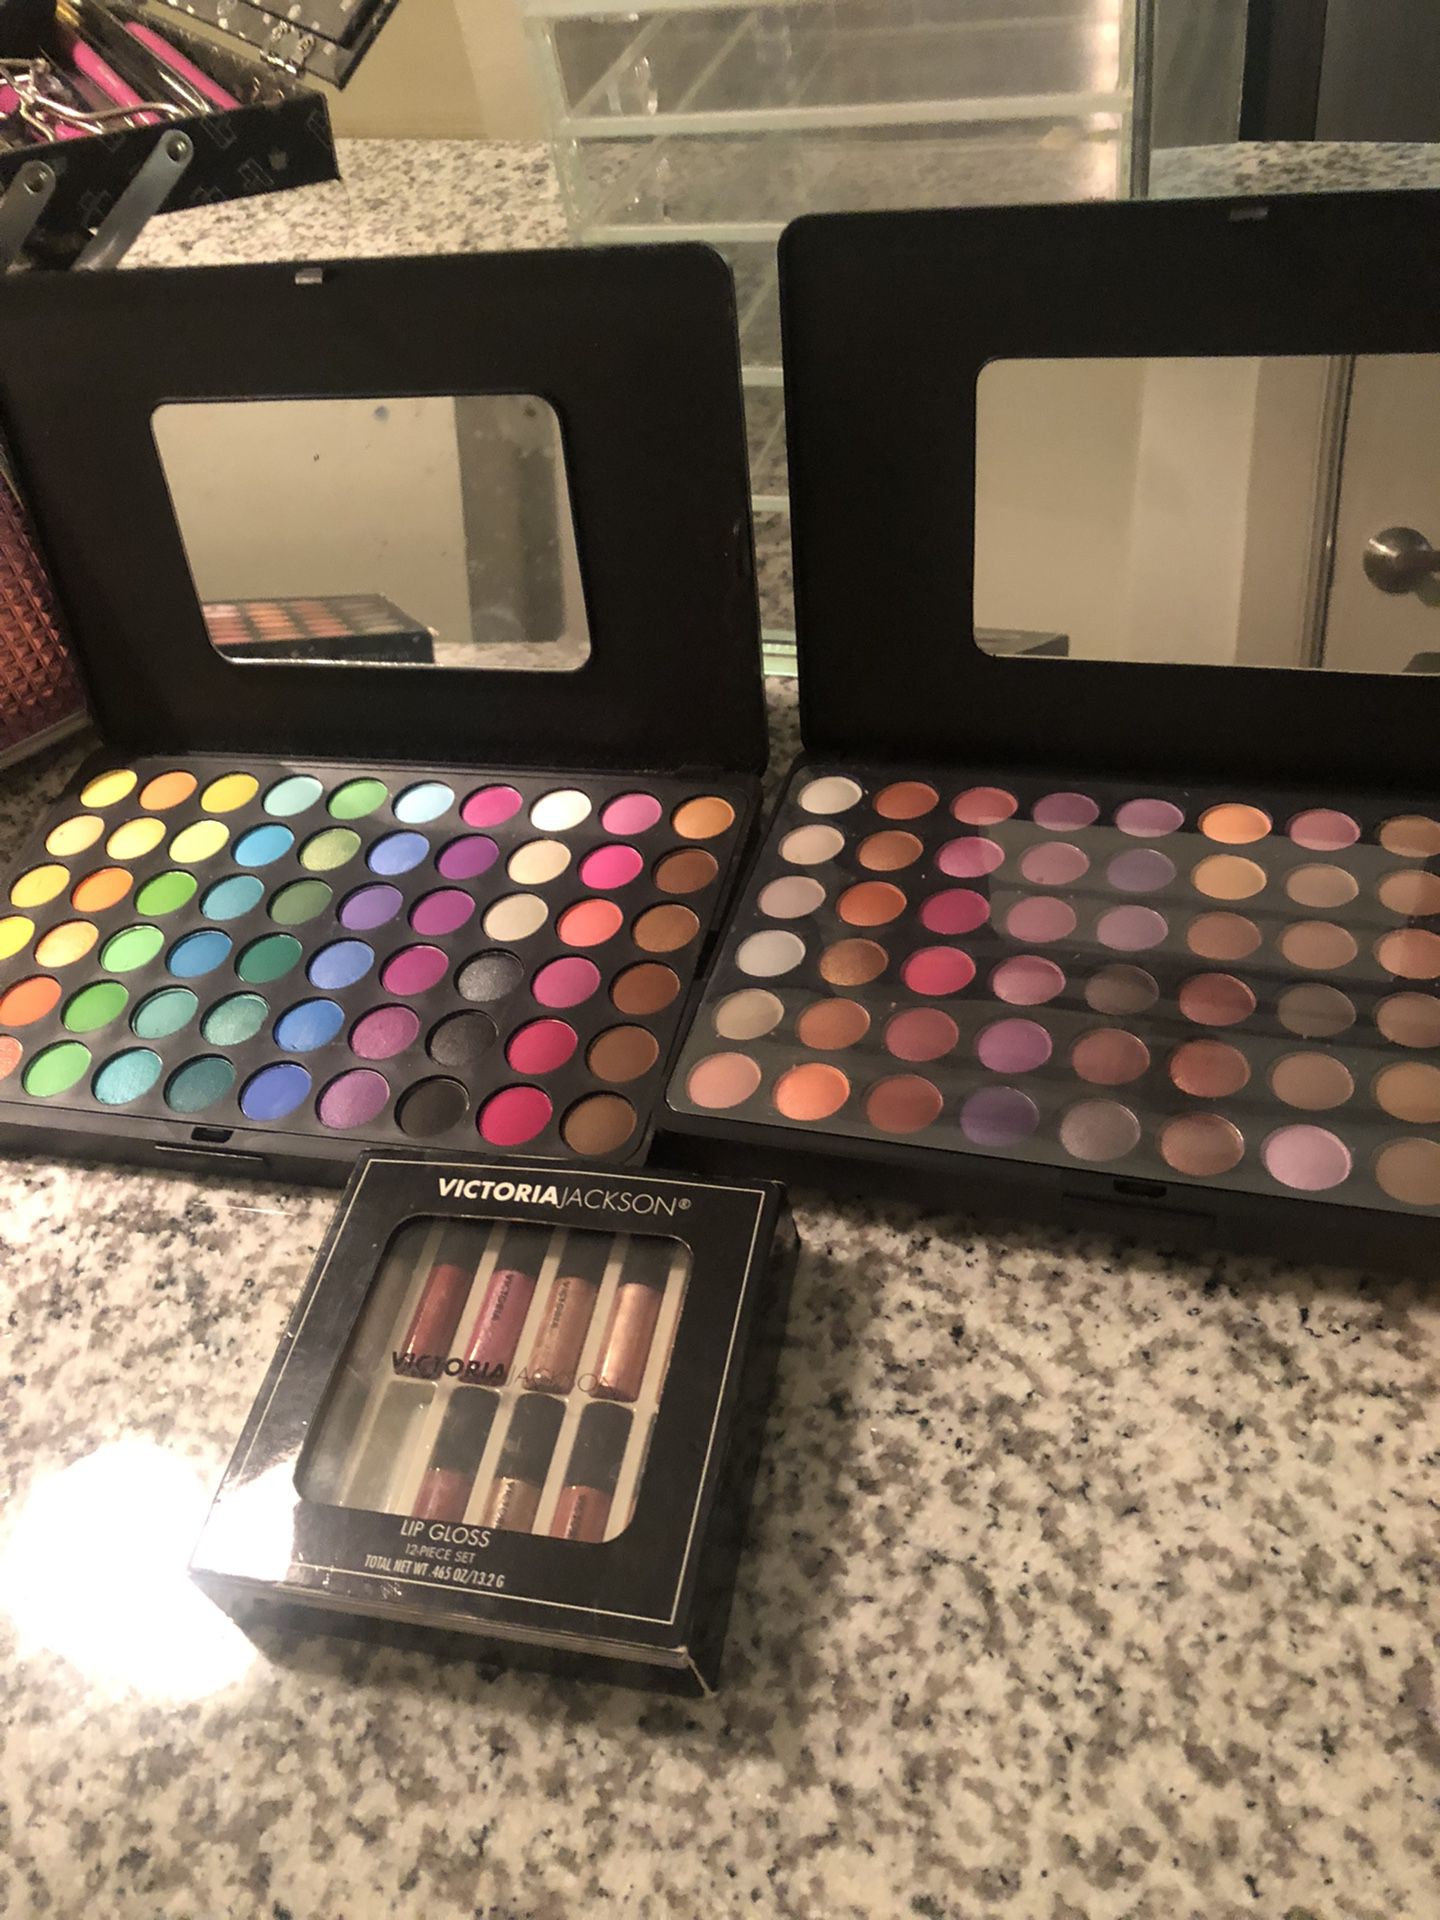 Make Up Box With Free Eyeshadow Pallets, Brushes And More! 